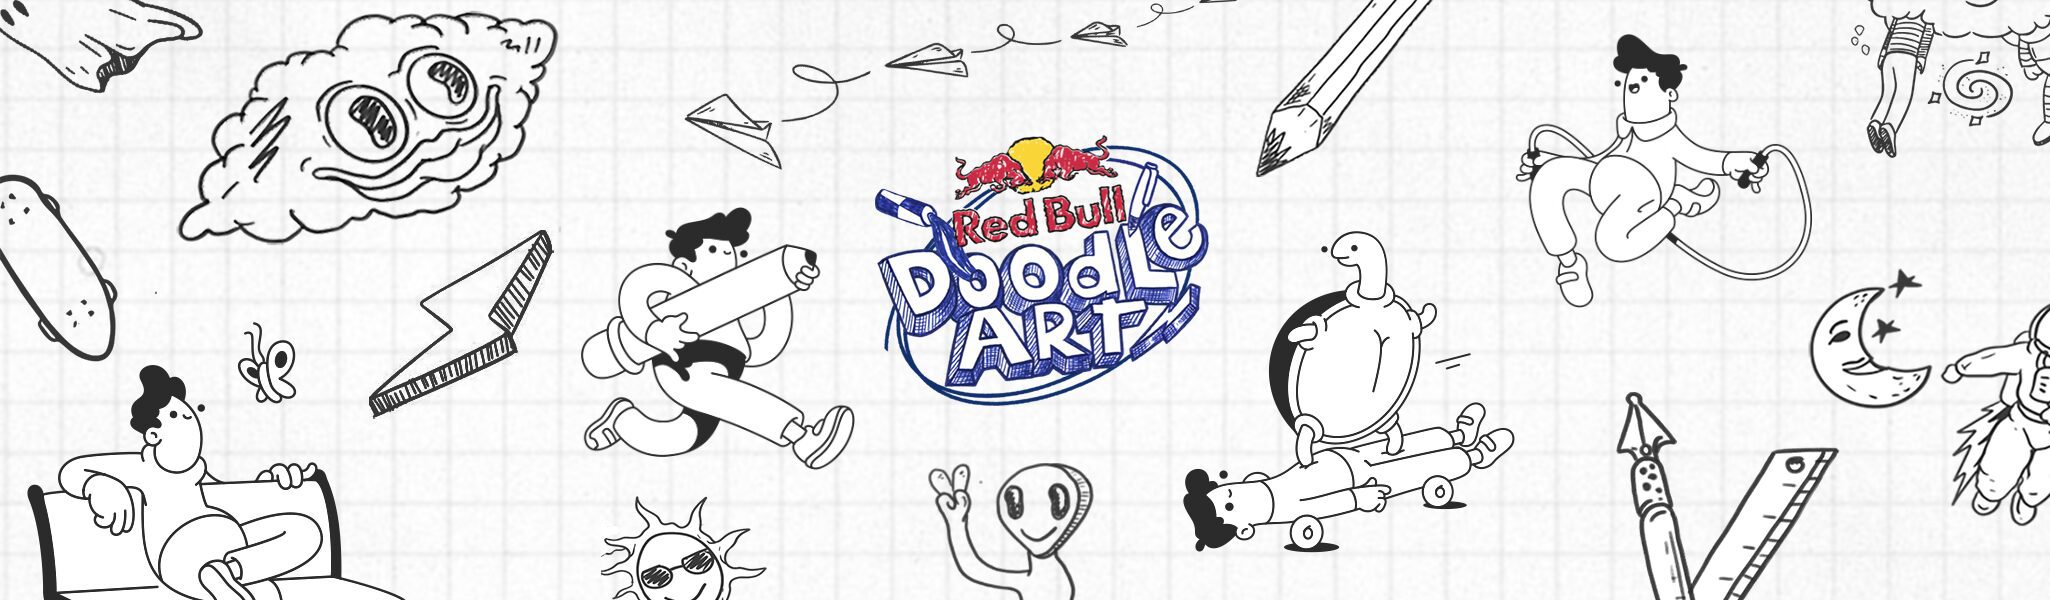 Red Bull Doodle Art Collection guided by Burnt Toast |  NFT CULTURE |  NFT News |  Web3 culture